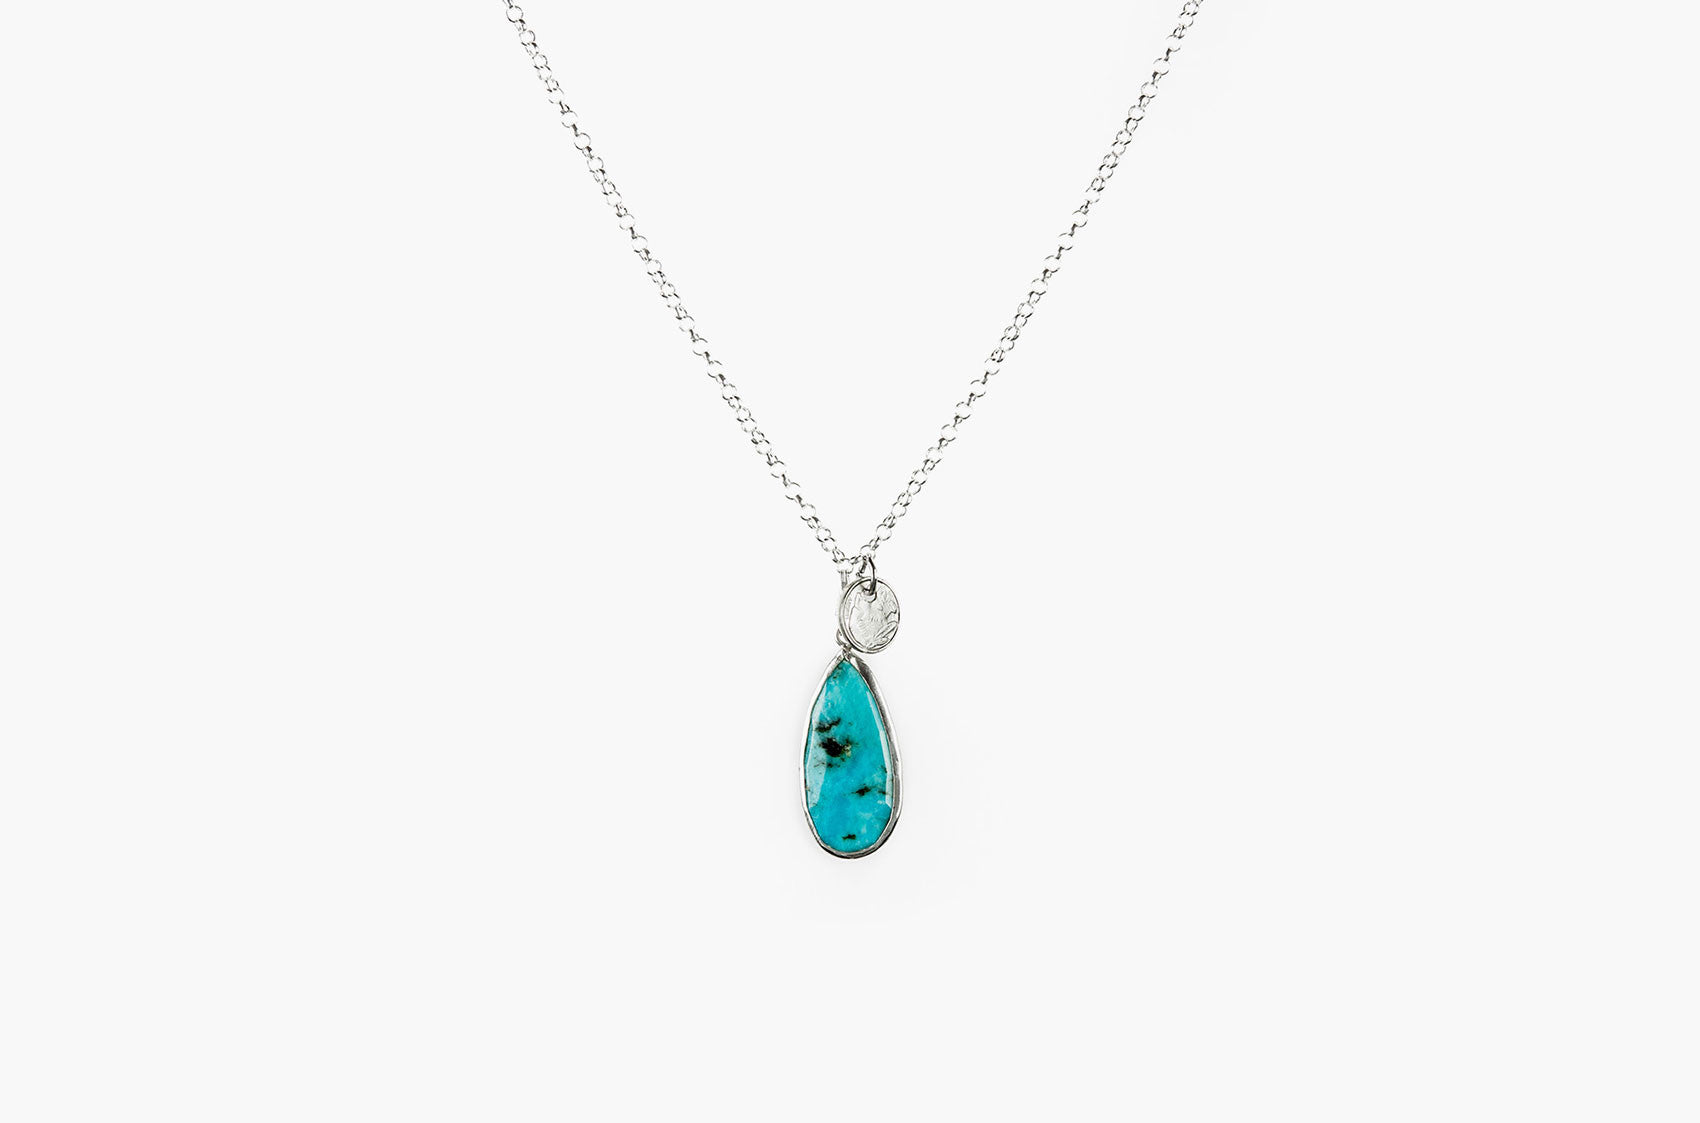 Turquoise Tears pendant necklace